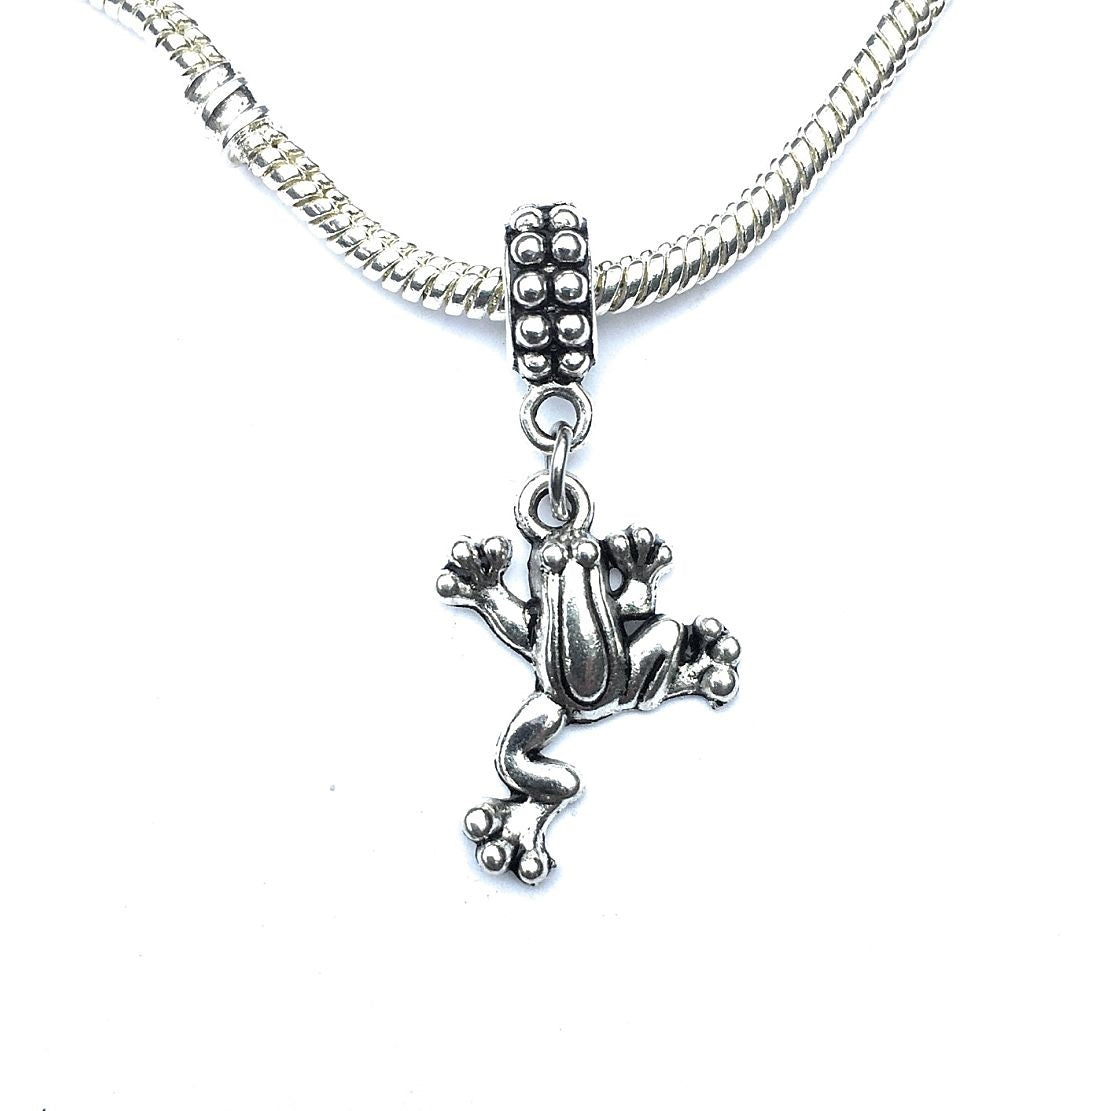 Handcrafted Silver Frog Charm Bead for Bracelet.